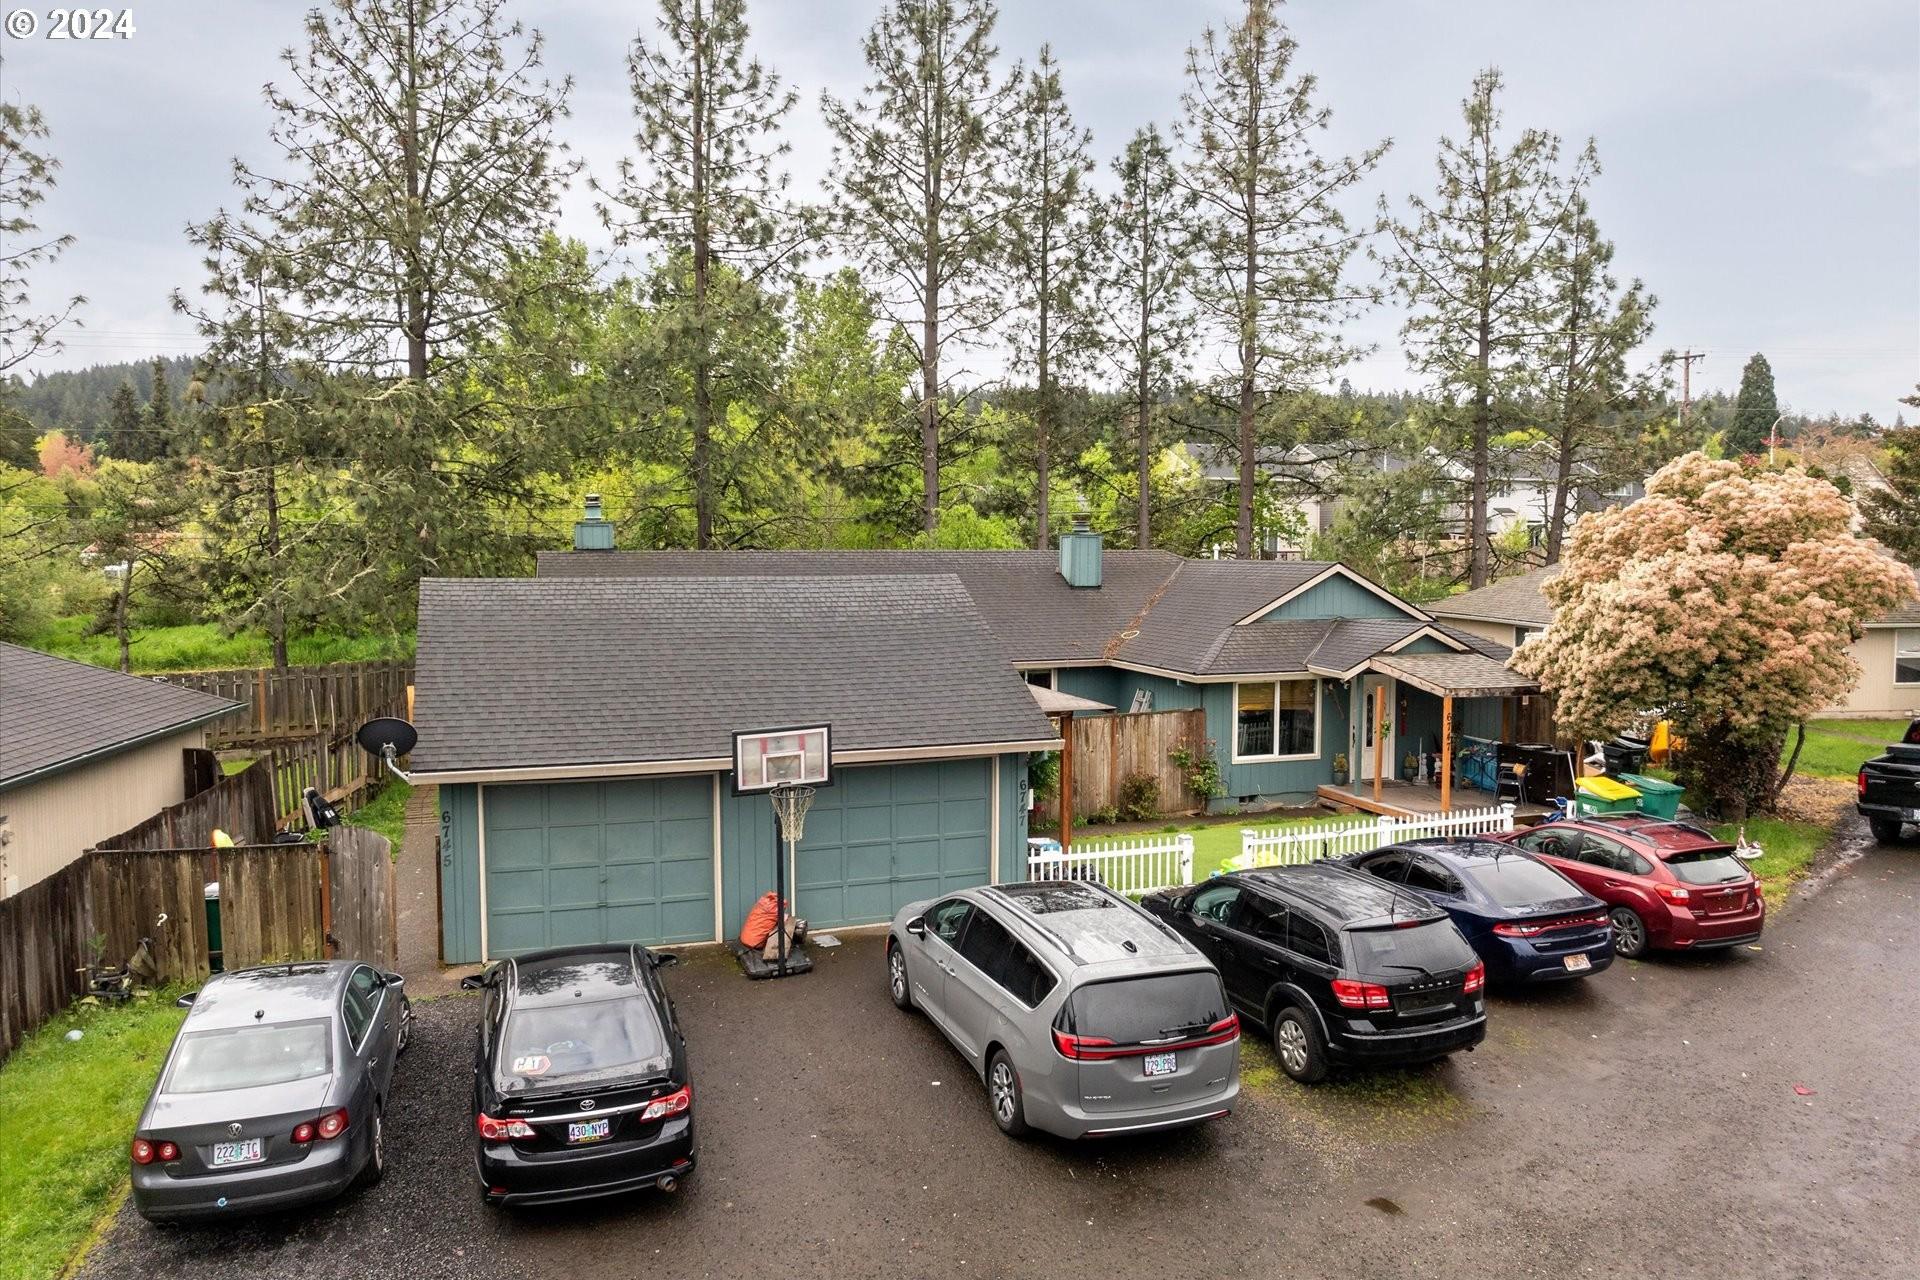 Property Image for 6747 Sw 196th Ave